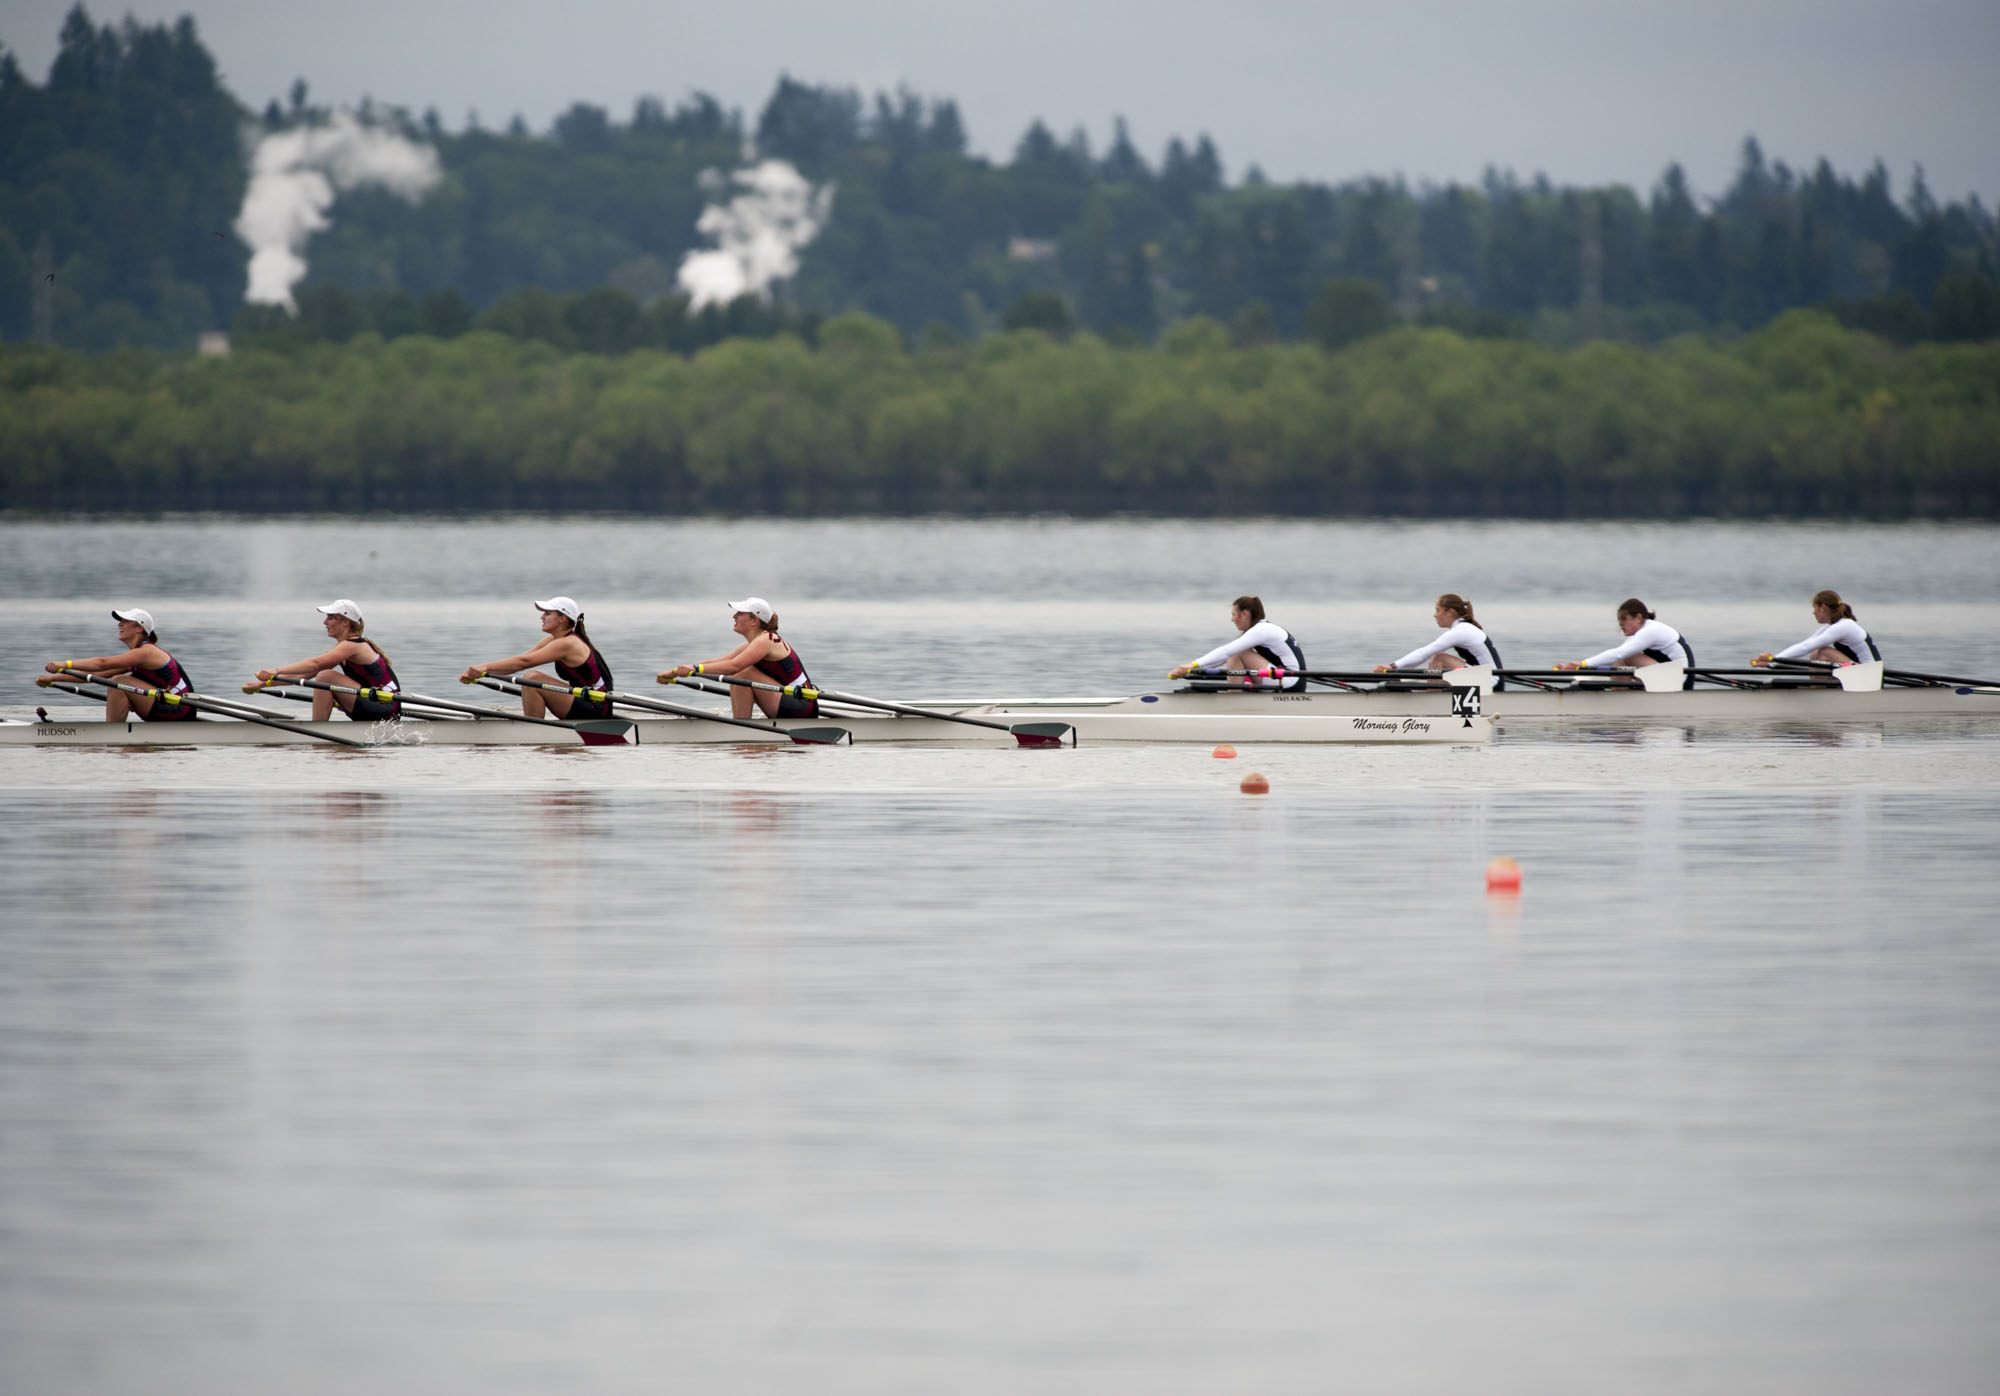 Youth rowing teams on Vancouver Lake.